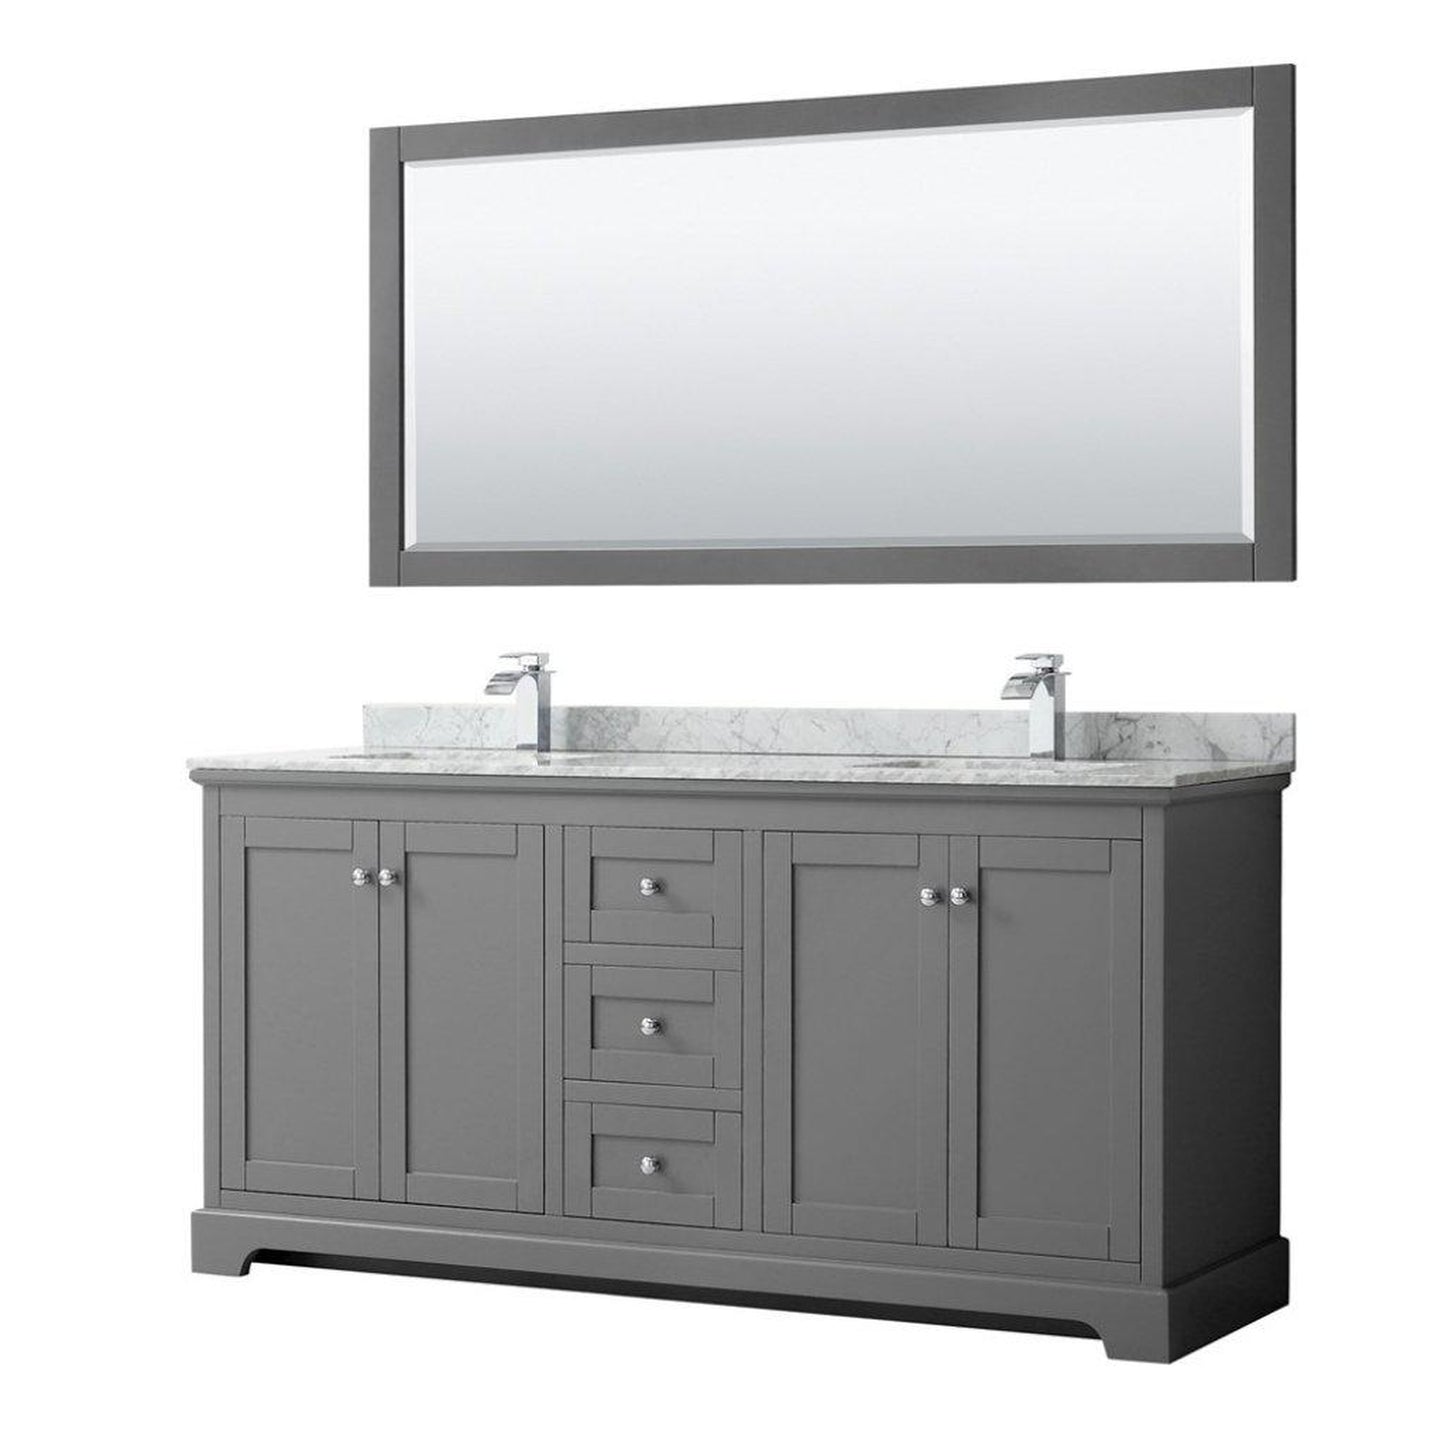 Wyndham Collection Avery 72" Dark Gray Double Bathroom Vanity Set With White Carrara Marble Countertop With 1-Hole Faucet And Square Sink And 70" Mirror